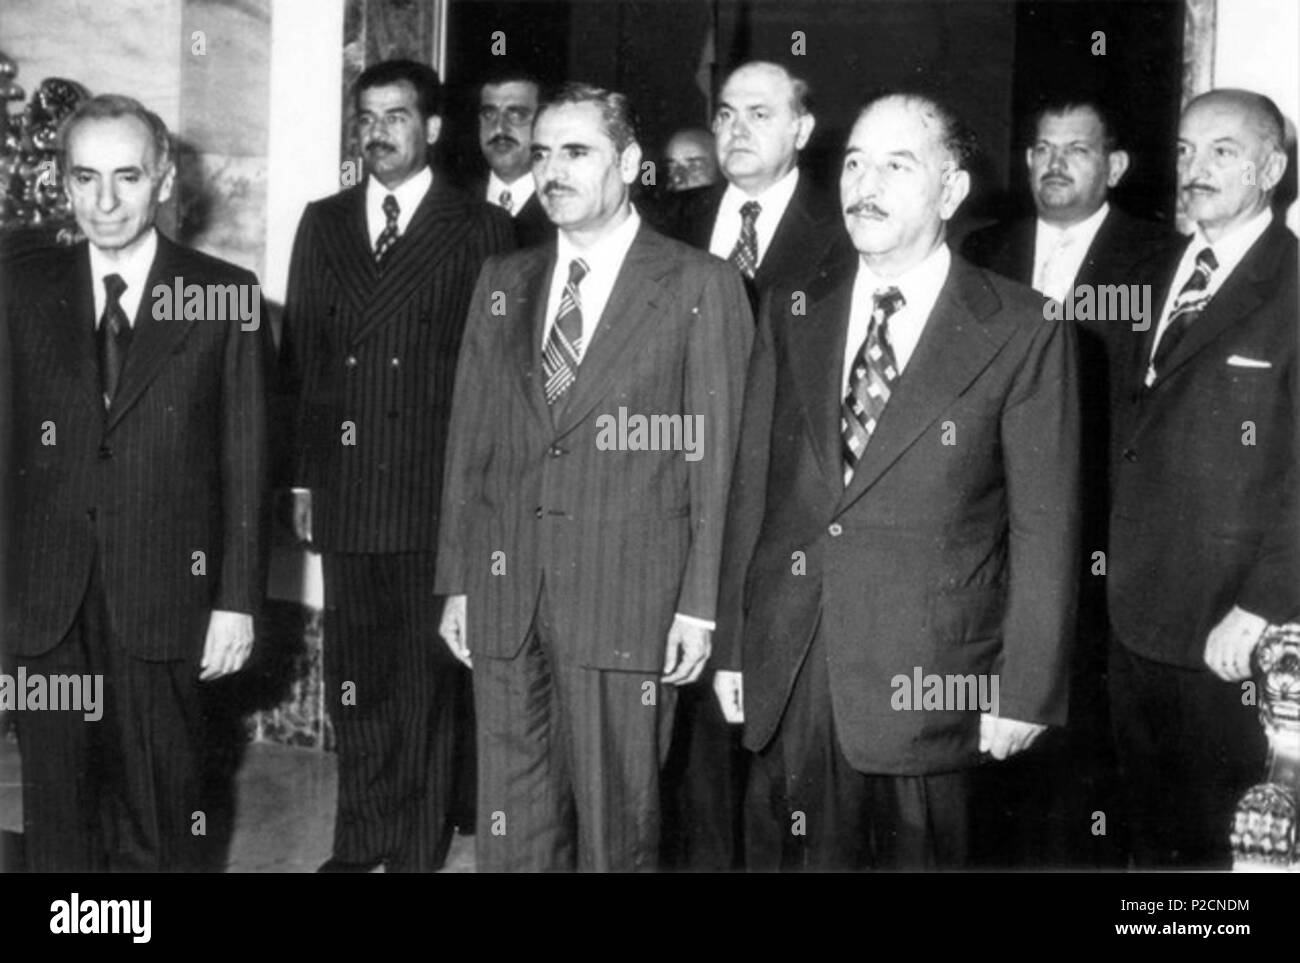 . English: Members of the National Command of the Arab Socialist Ba'th Party (Iraqi wing): Party founder and General Secretary Michel Aflaq (left), Iraqi Vice president Saddam Hussein (second line), Assistant General Secretary Shibli al-Ayssami (mid left), Iraqi president Ahmad Hasan al-Bakr (mid right) and others . between 1968 and 1979 (around 1974). Unknown 5 Baath National Command Stock Photo